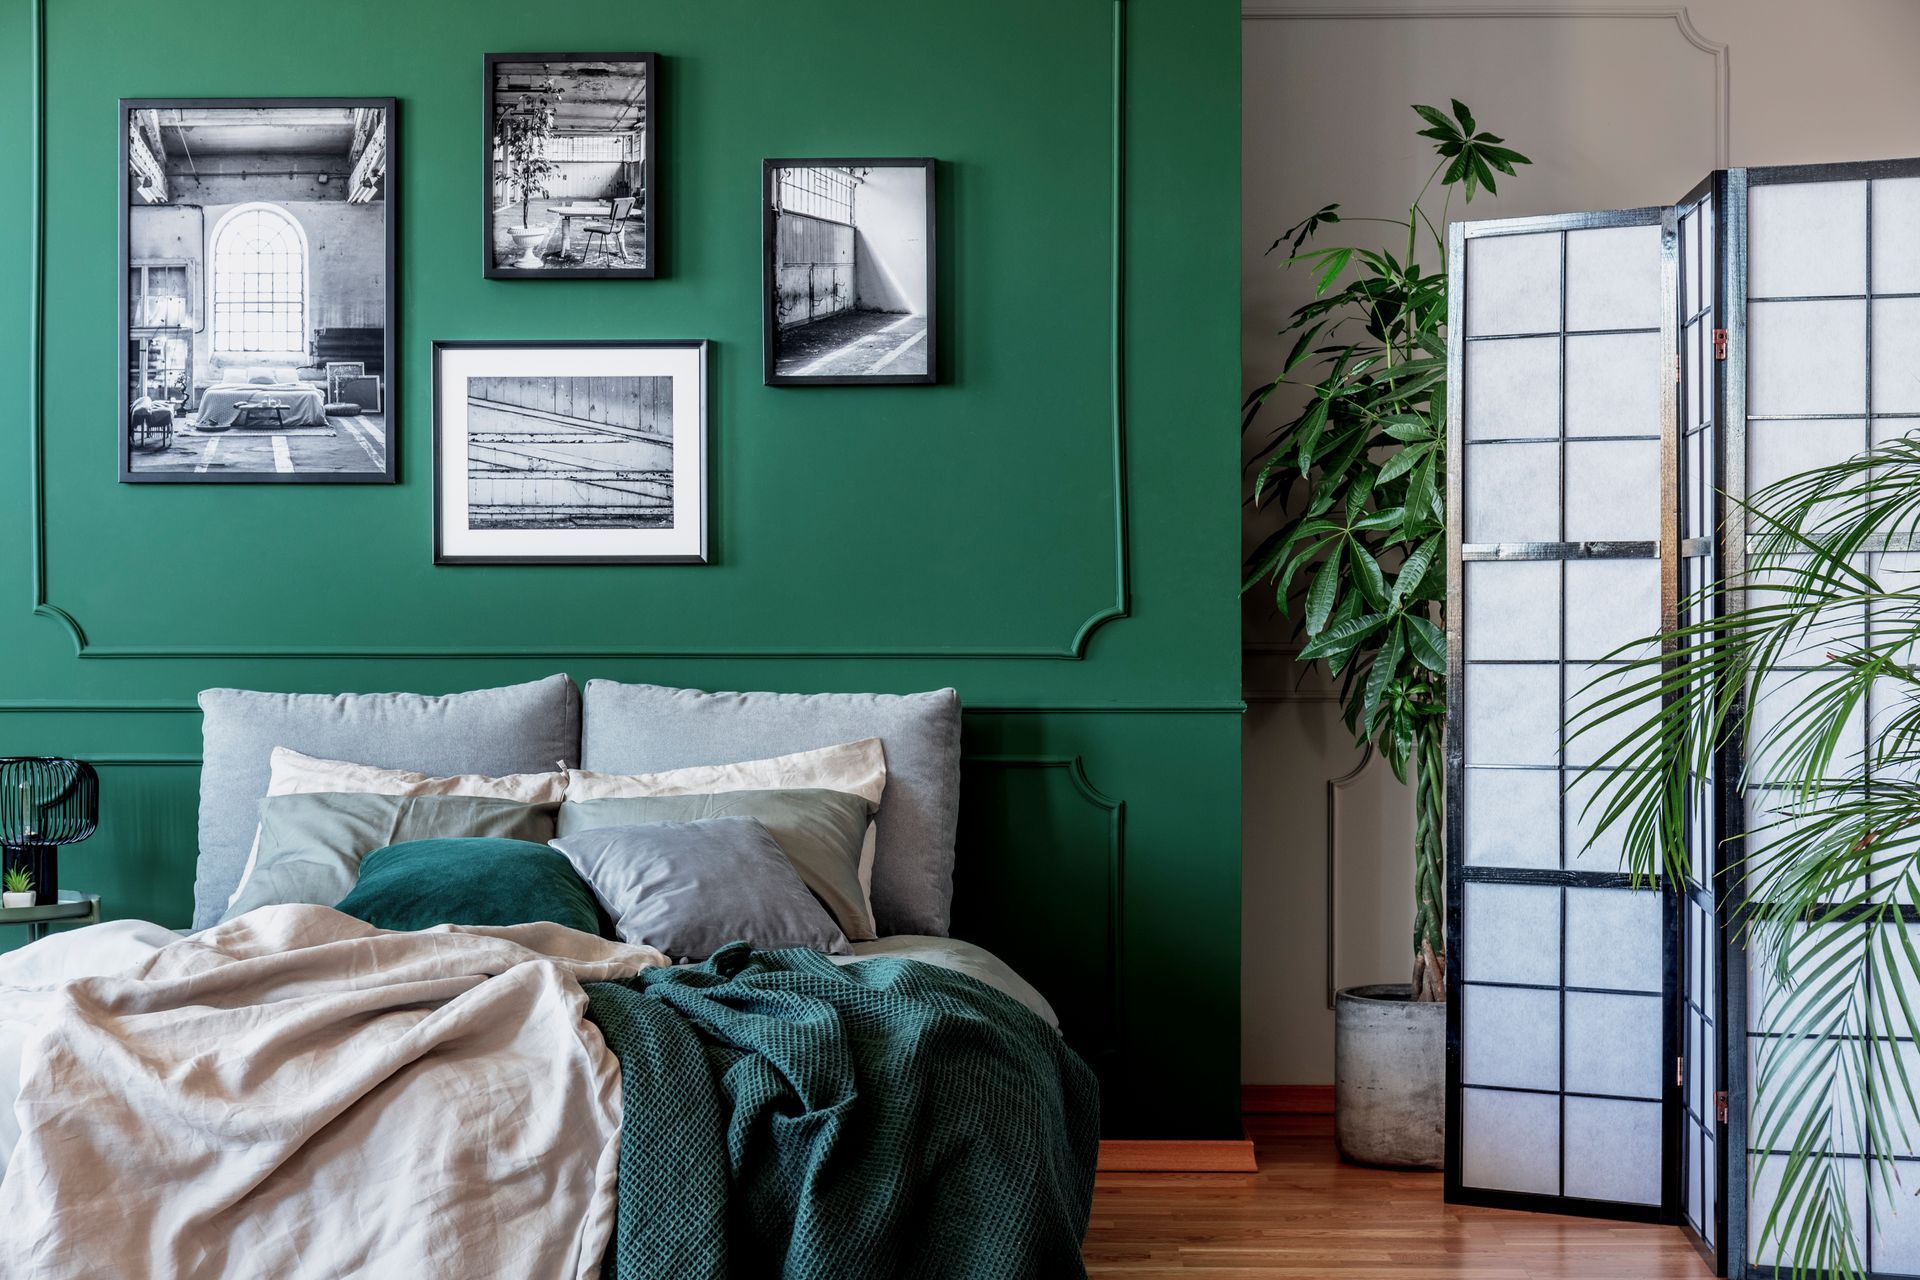 A gallery of black and white photos on an emerald green bedroom wall